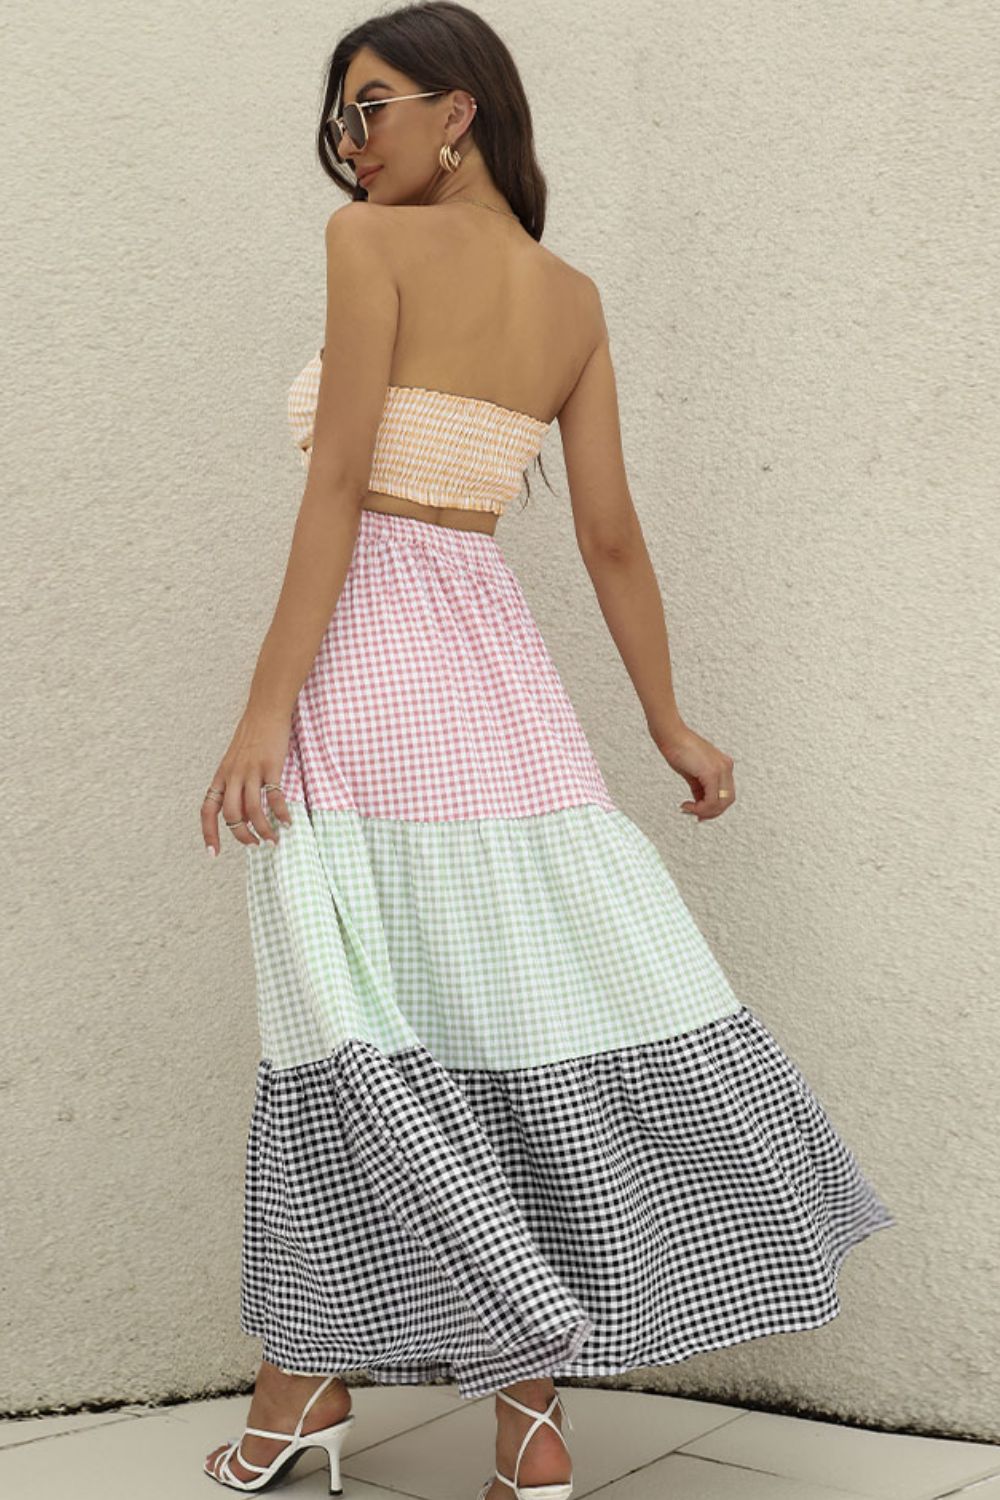 Gray I Sea You Plaid Strapless Top and Tiered Skirt Set Outfit Sets